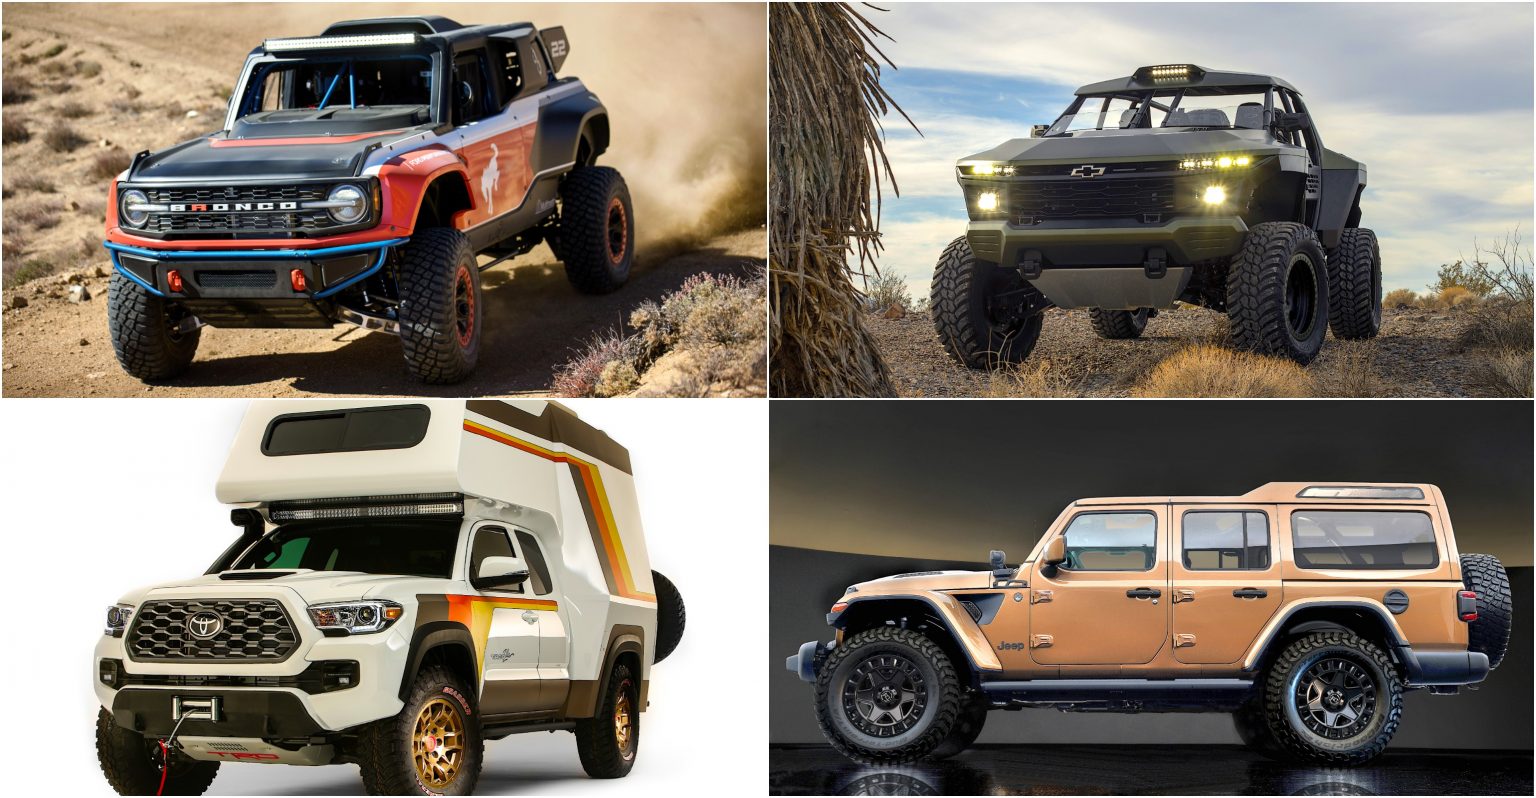 8 Great Concepts From the 2021 SEMA Aftermarket Car Show in Las Vegas